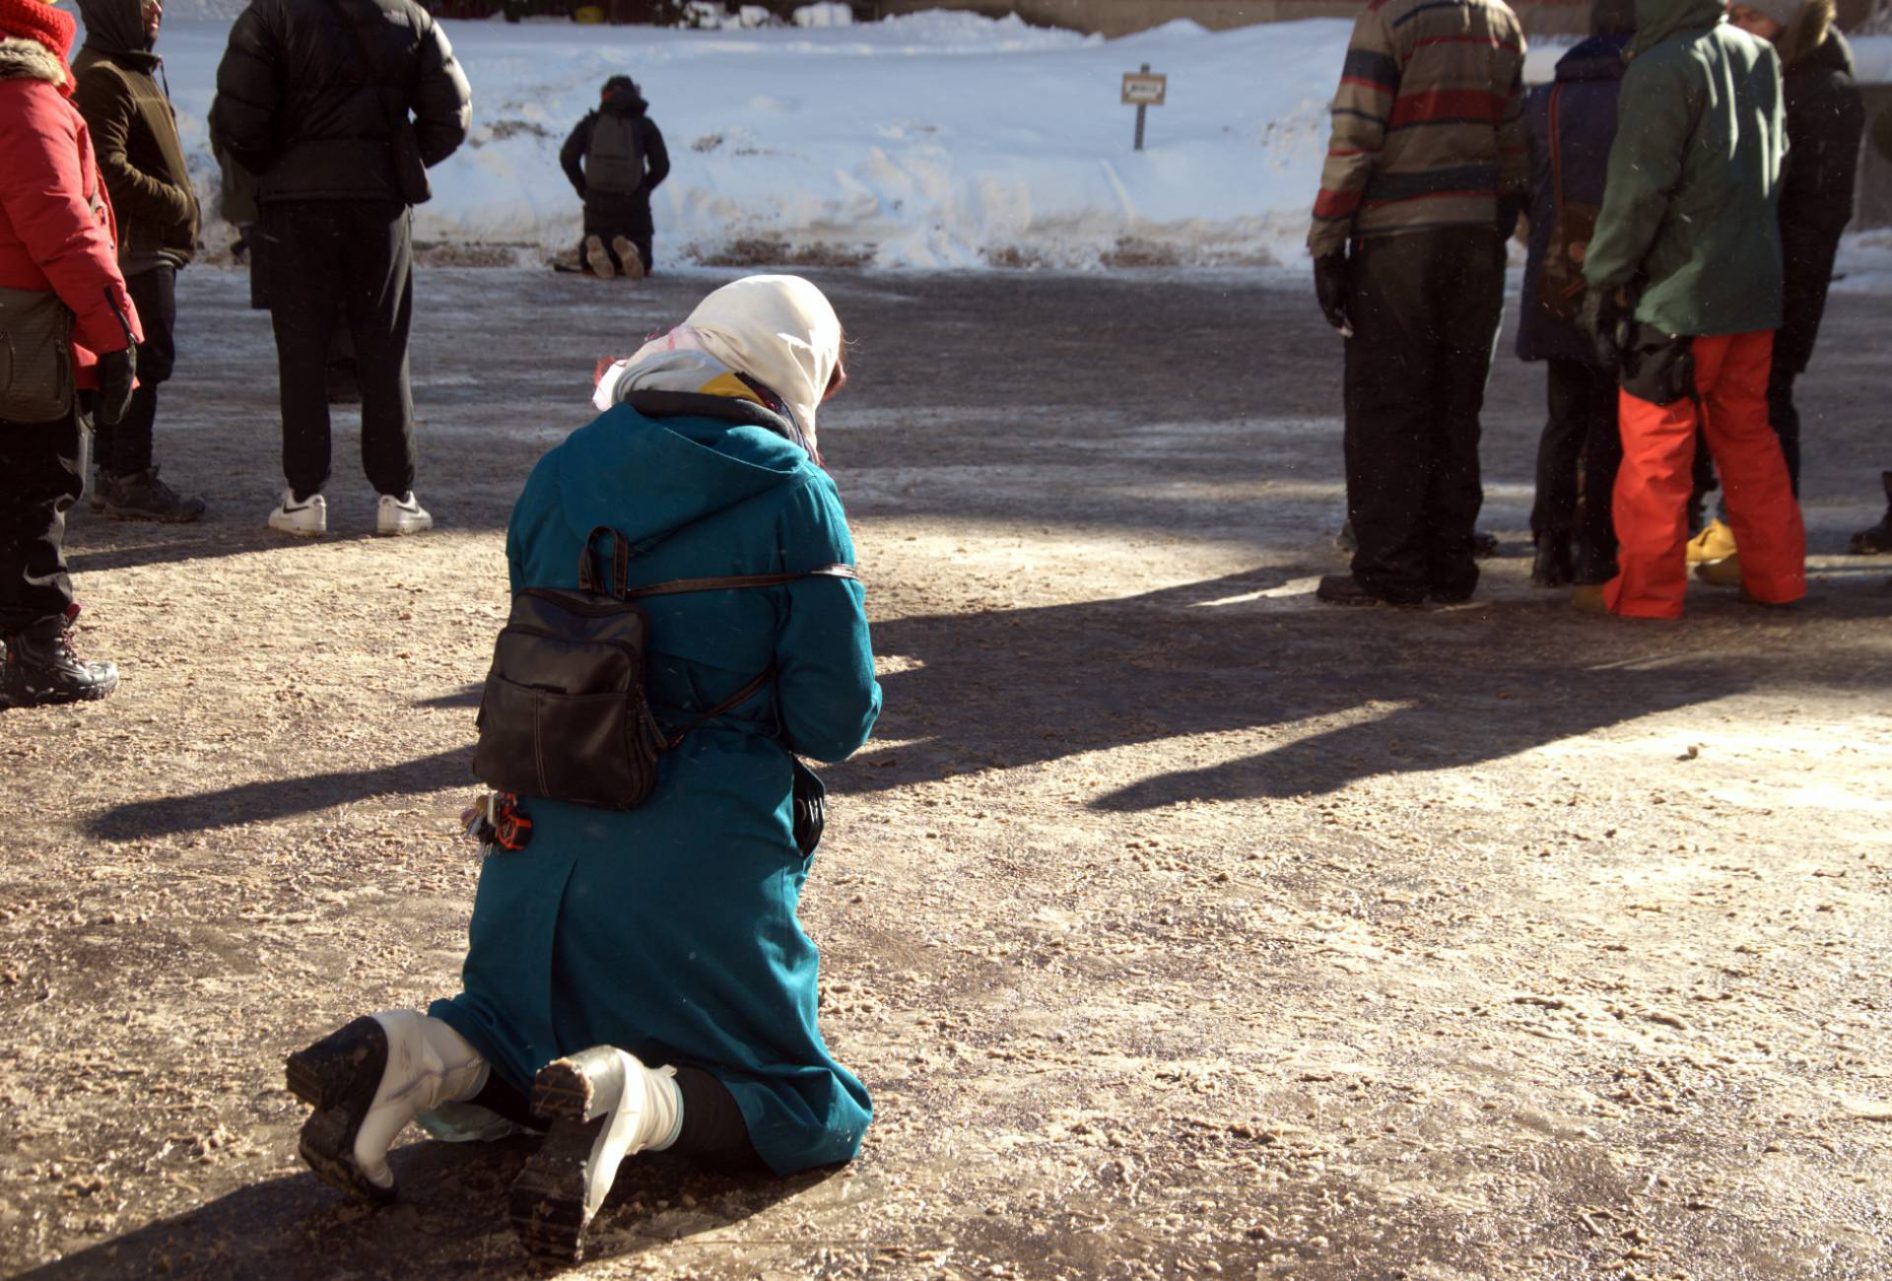 worshipper kneeling down onto the icy ground of the parking lot behind the Montreal cathedral during the mass